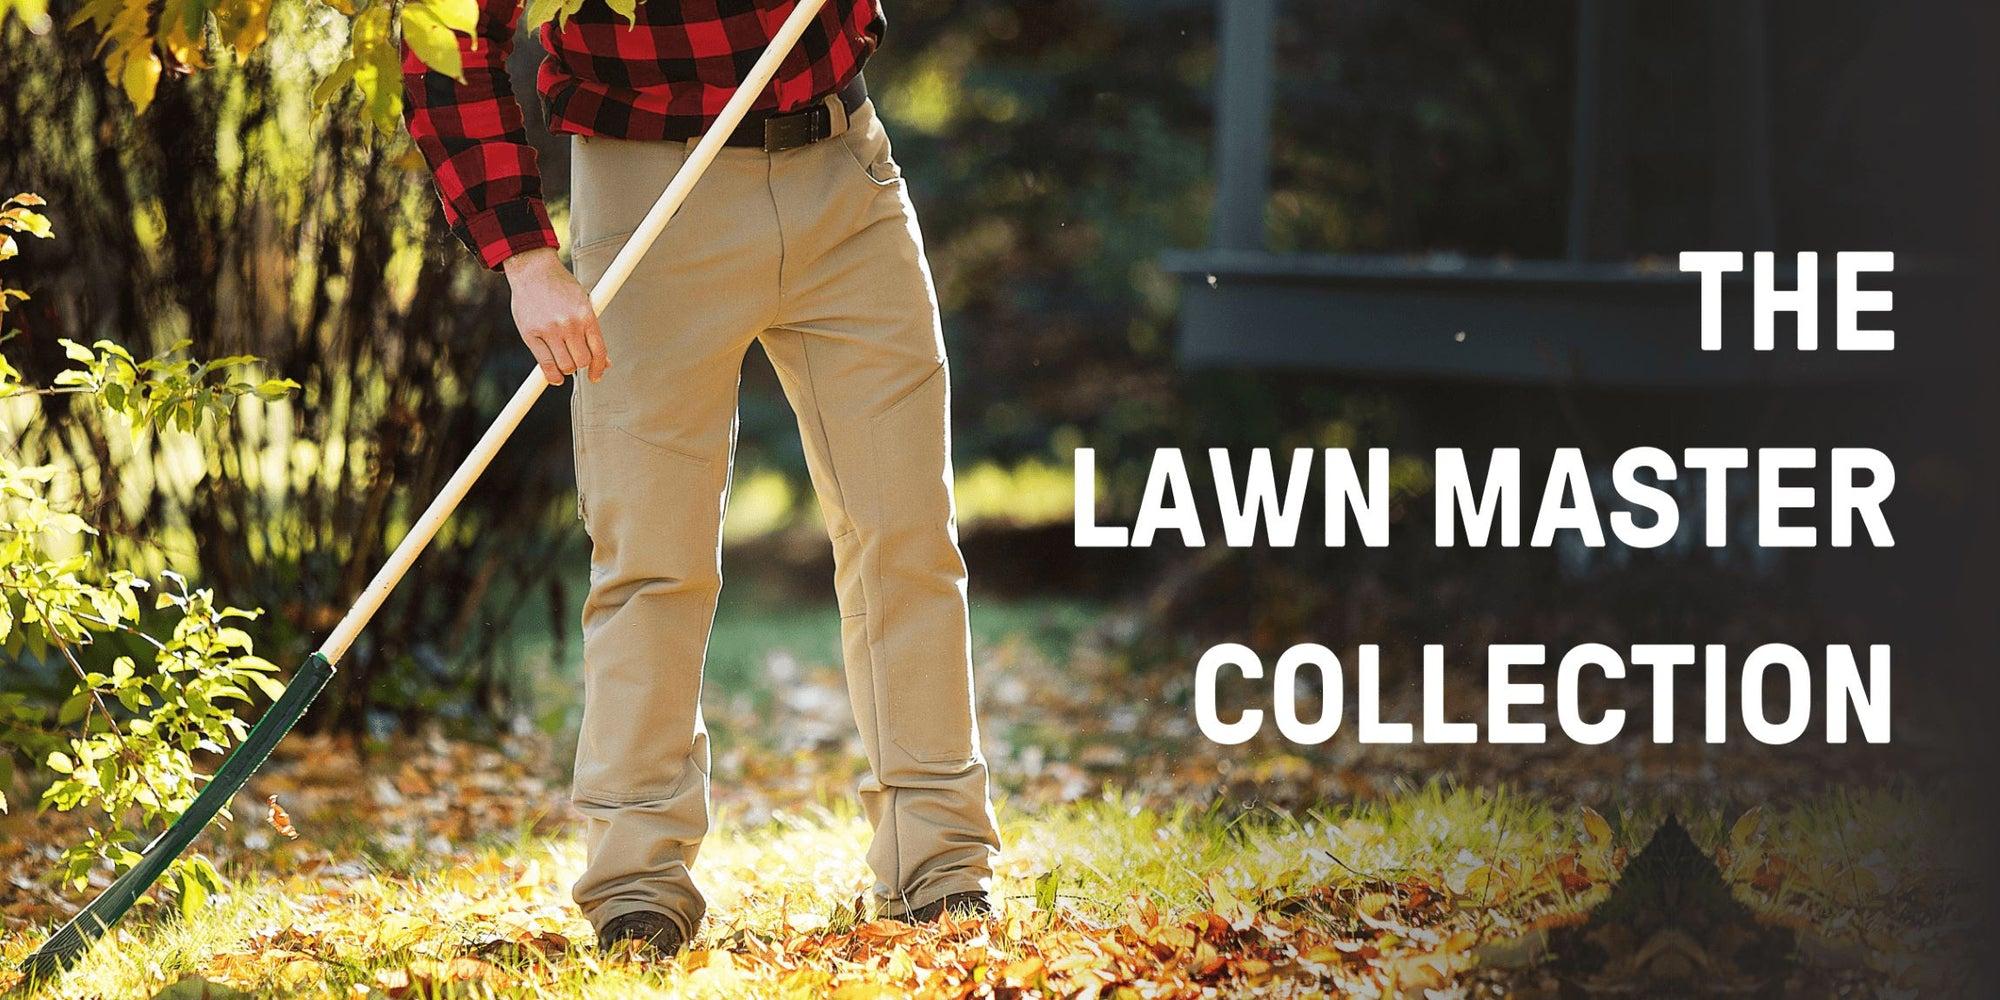 For the Lawn Master